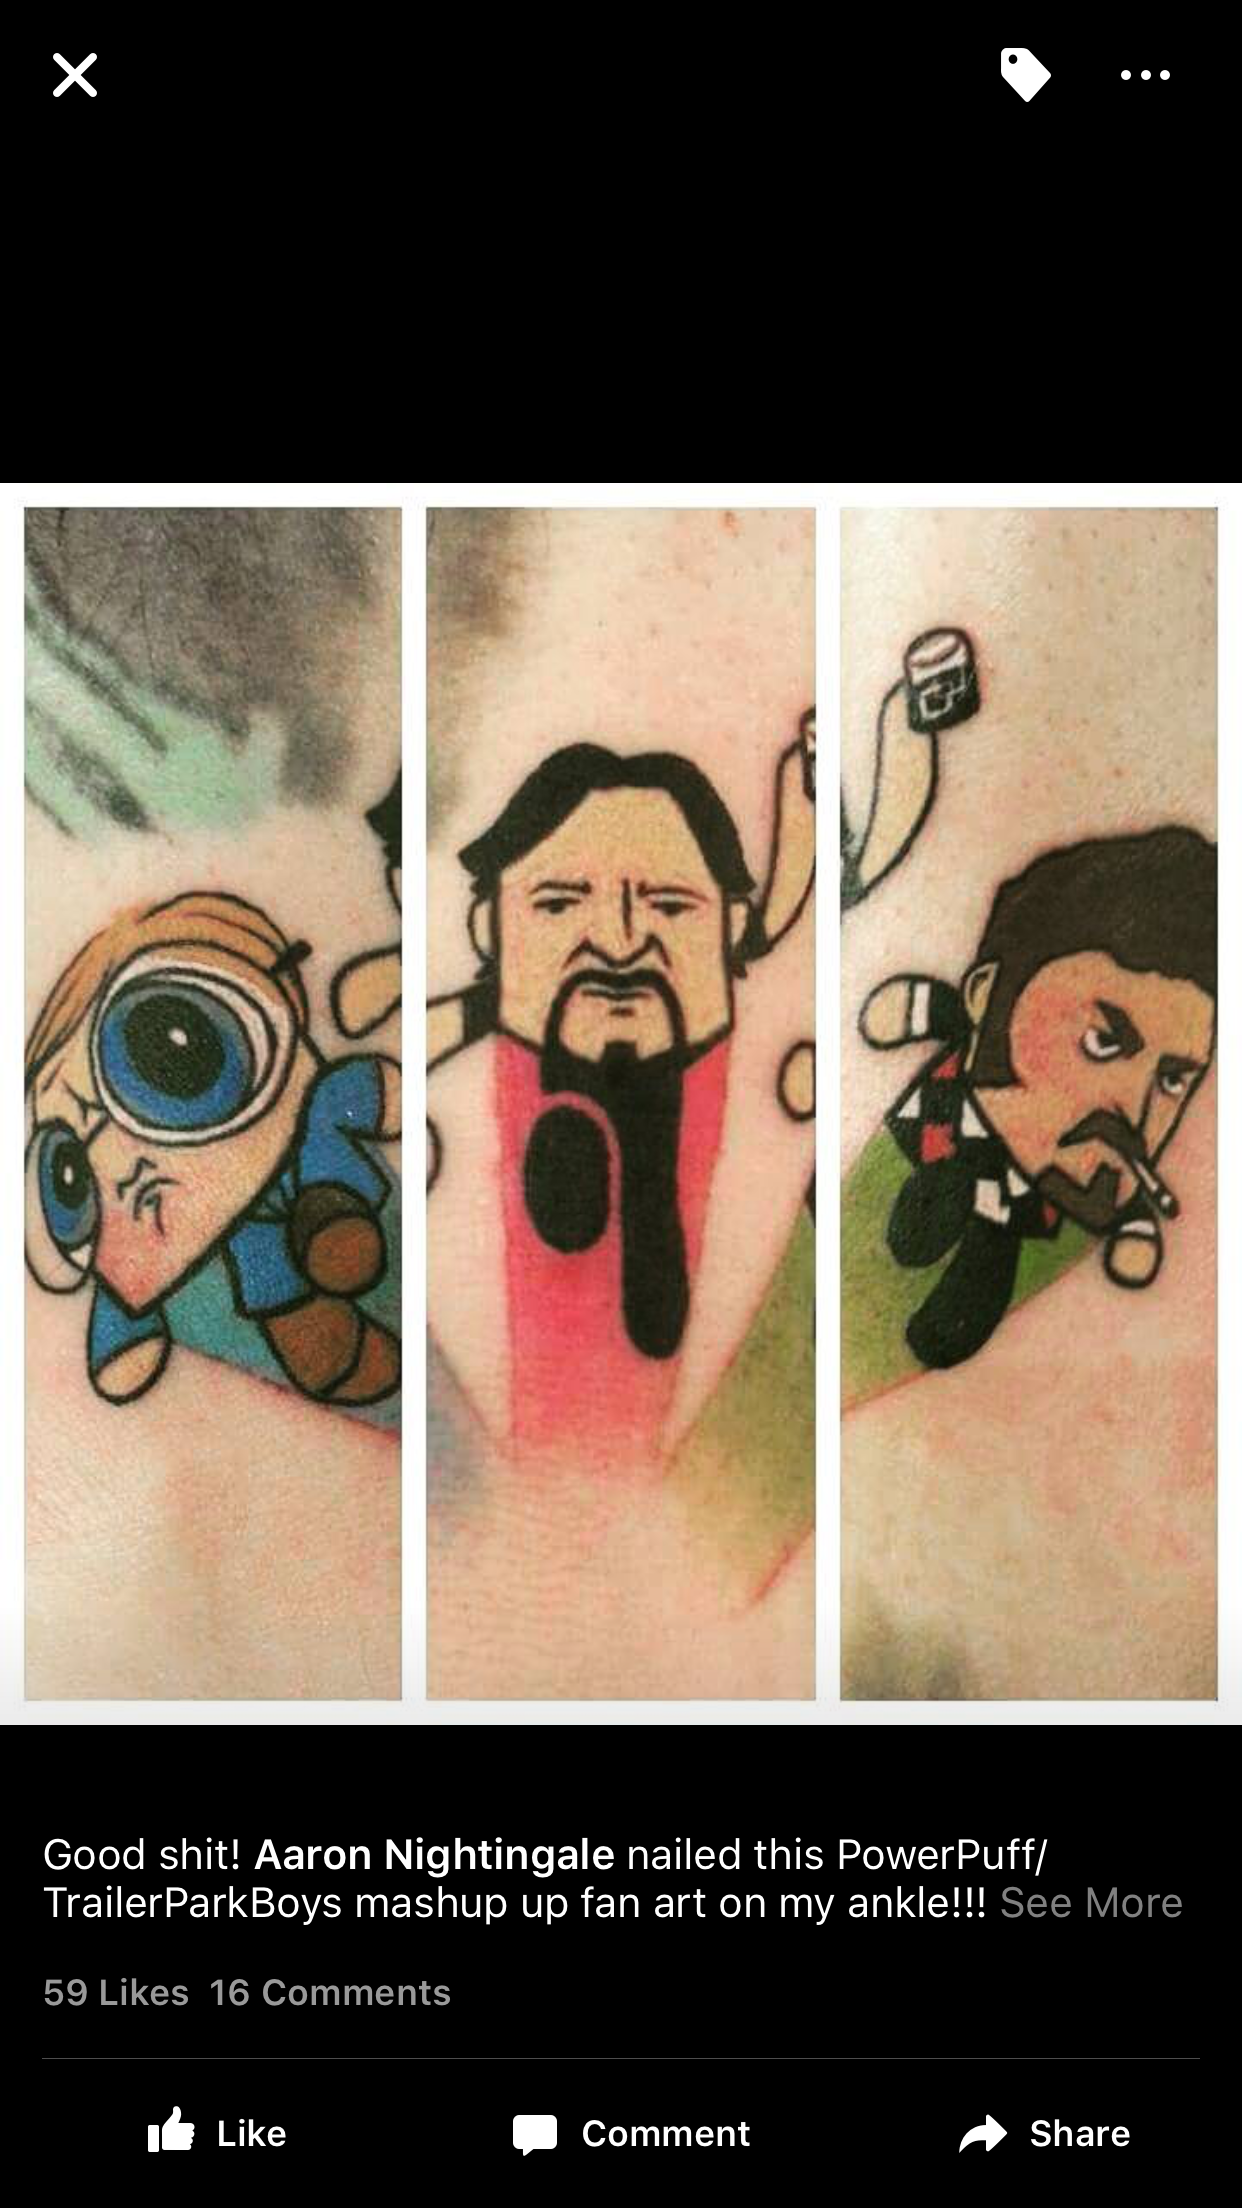 trailer park boys tattoo - Good shit! Aaron Nightingale nailed this PowerPuff TrailerParkBoys mashup up fan art on my ankle!!! See More 59 16 Comment